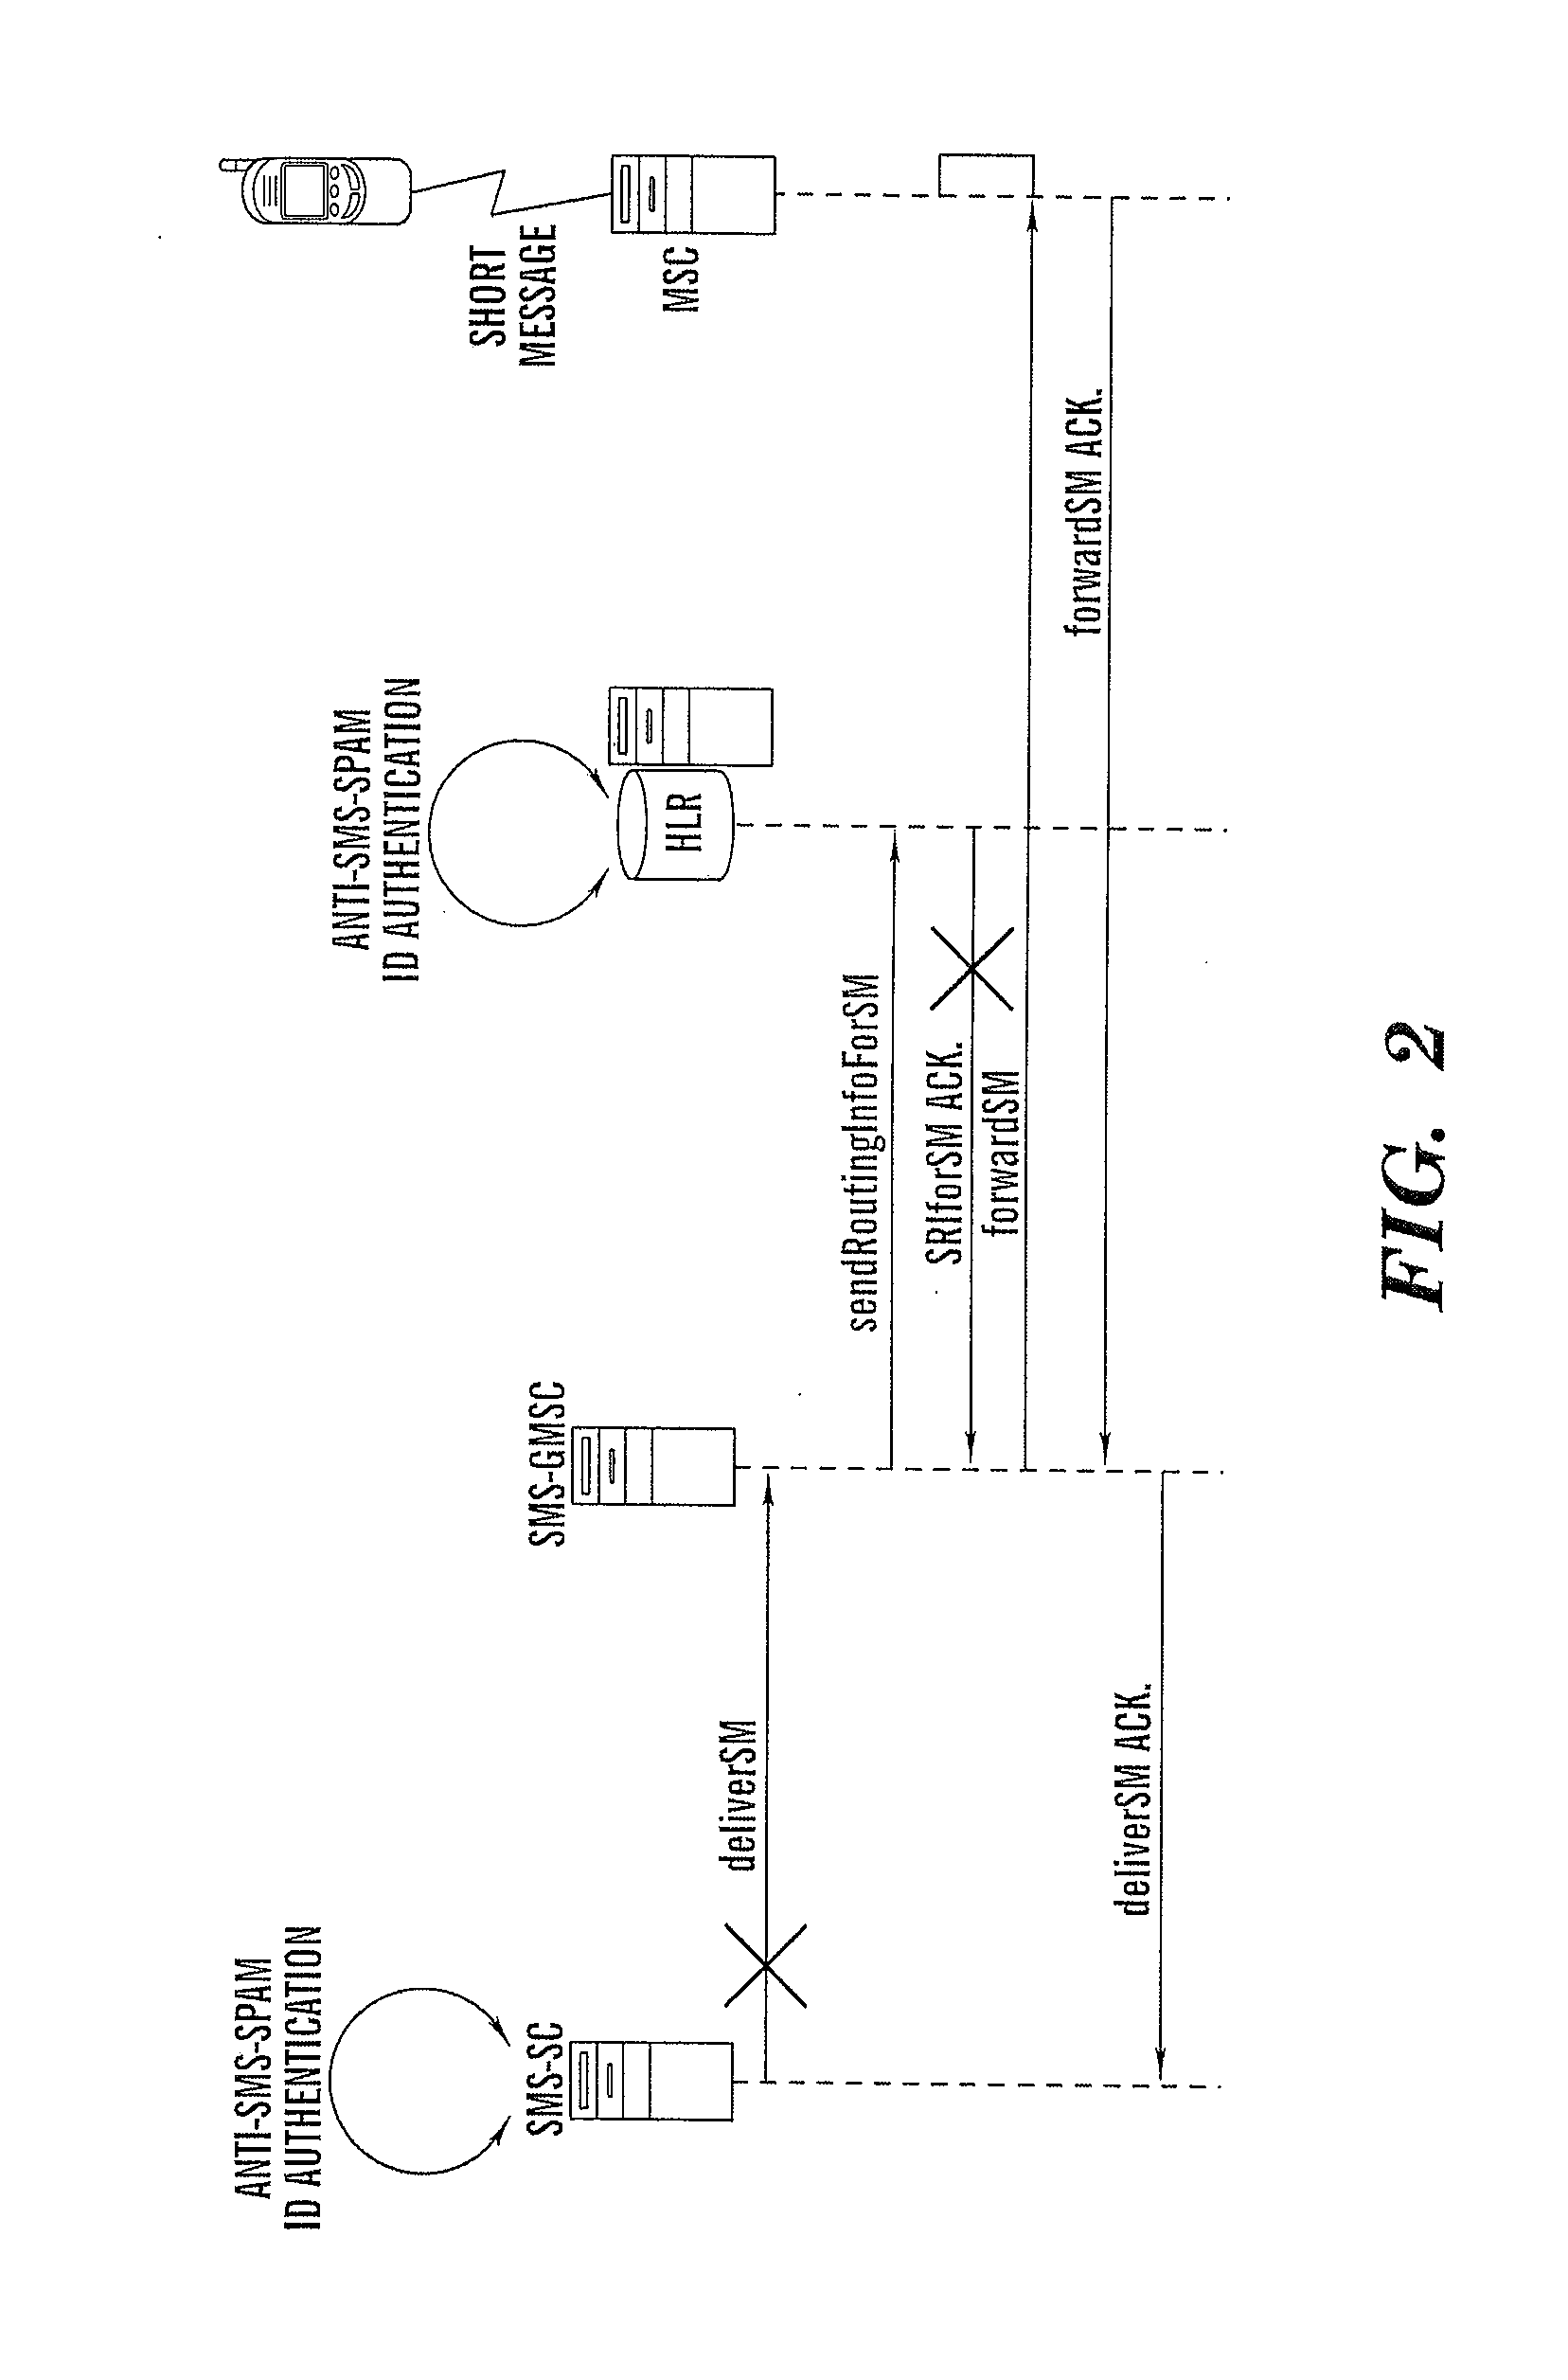 Method and apparatus for filtering short message system spam